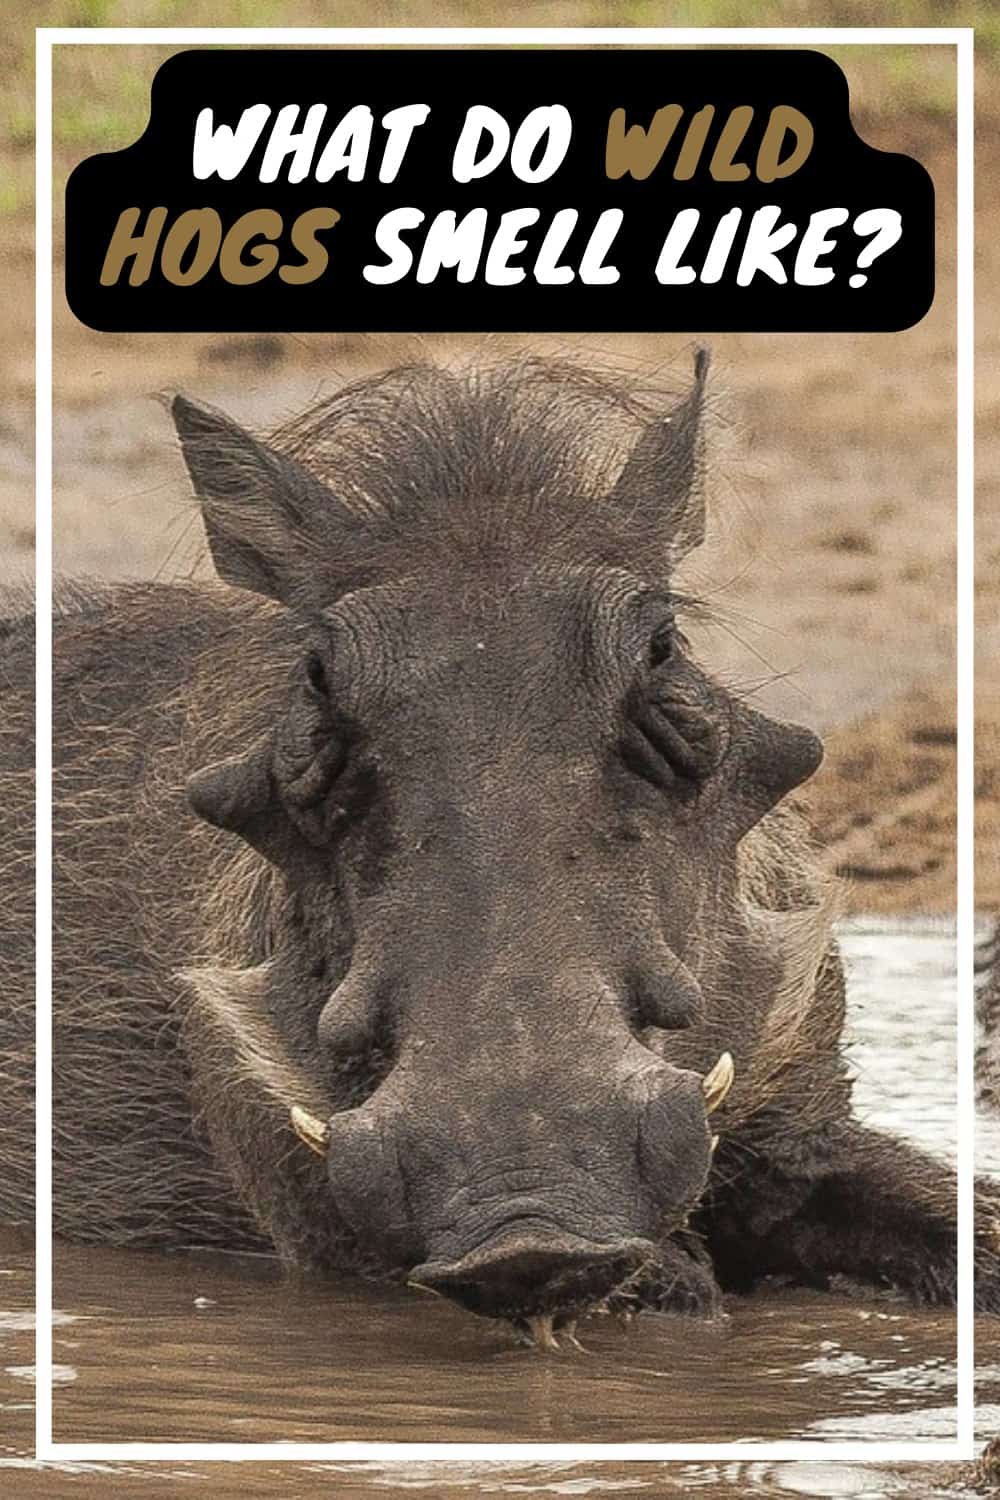 Wild Hogs smell like feces and urine